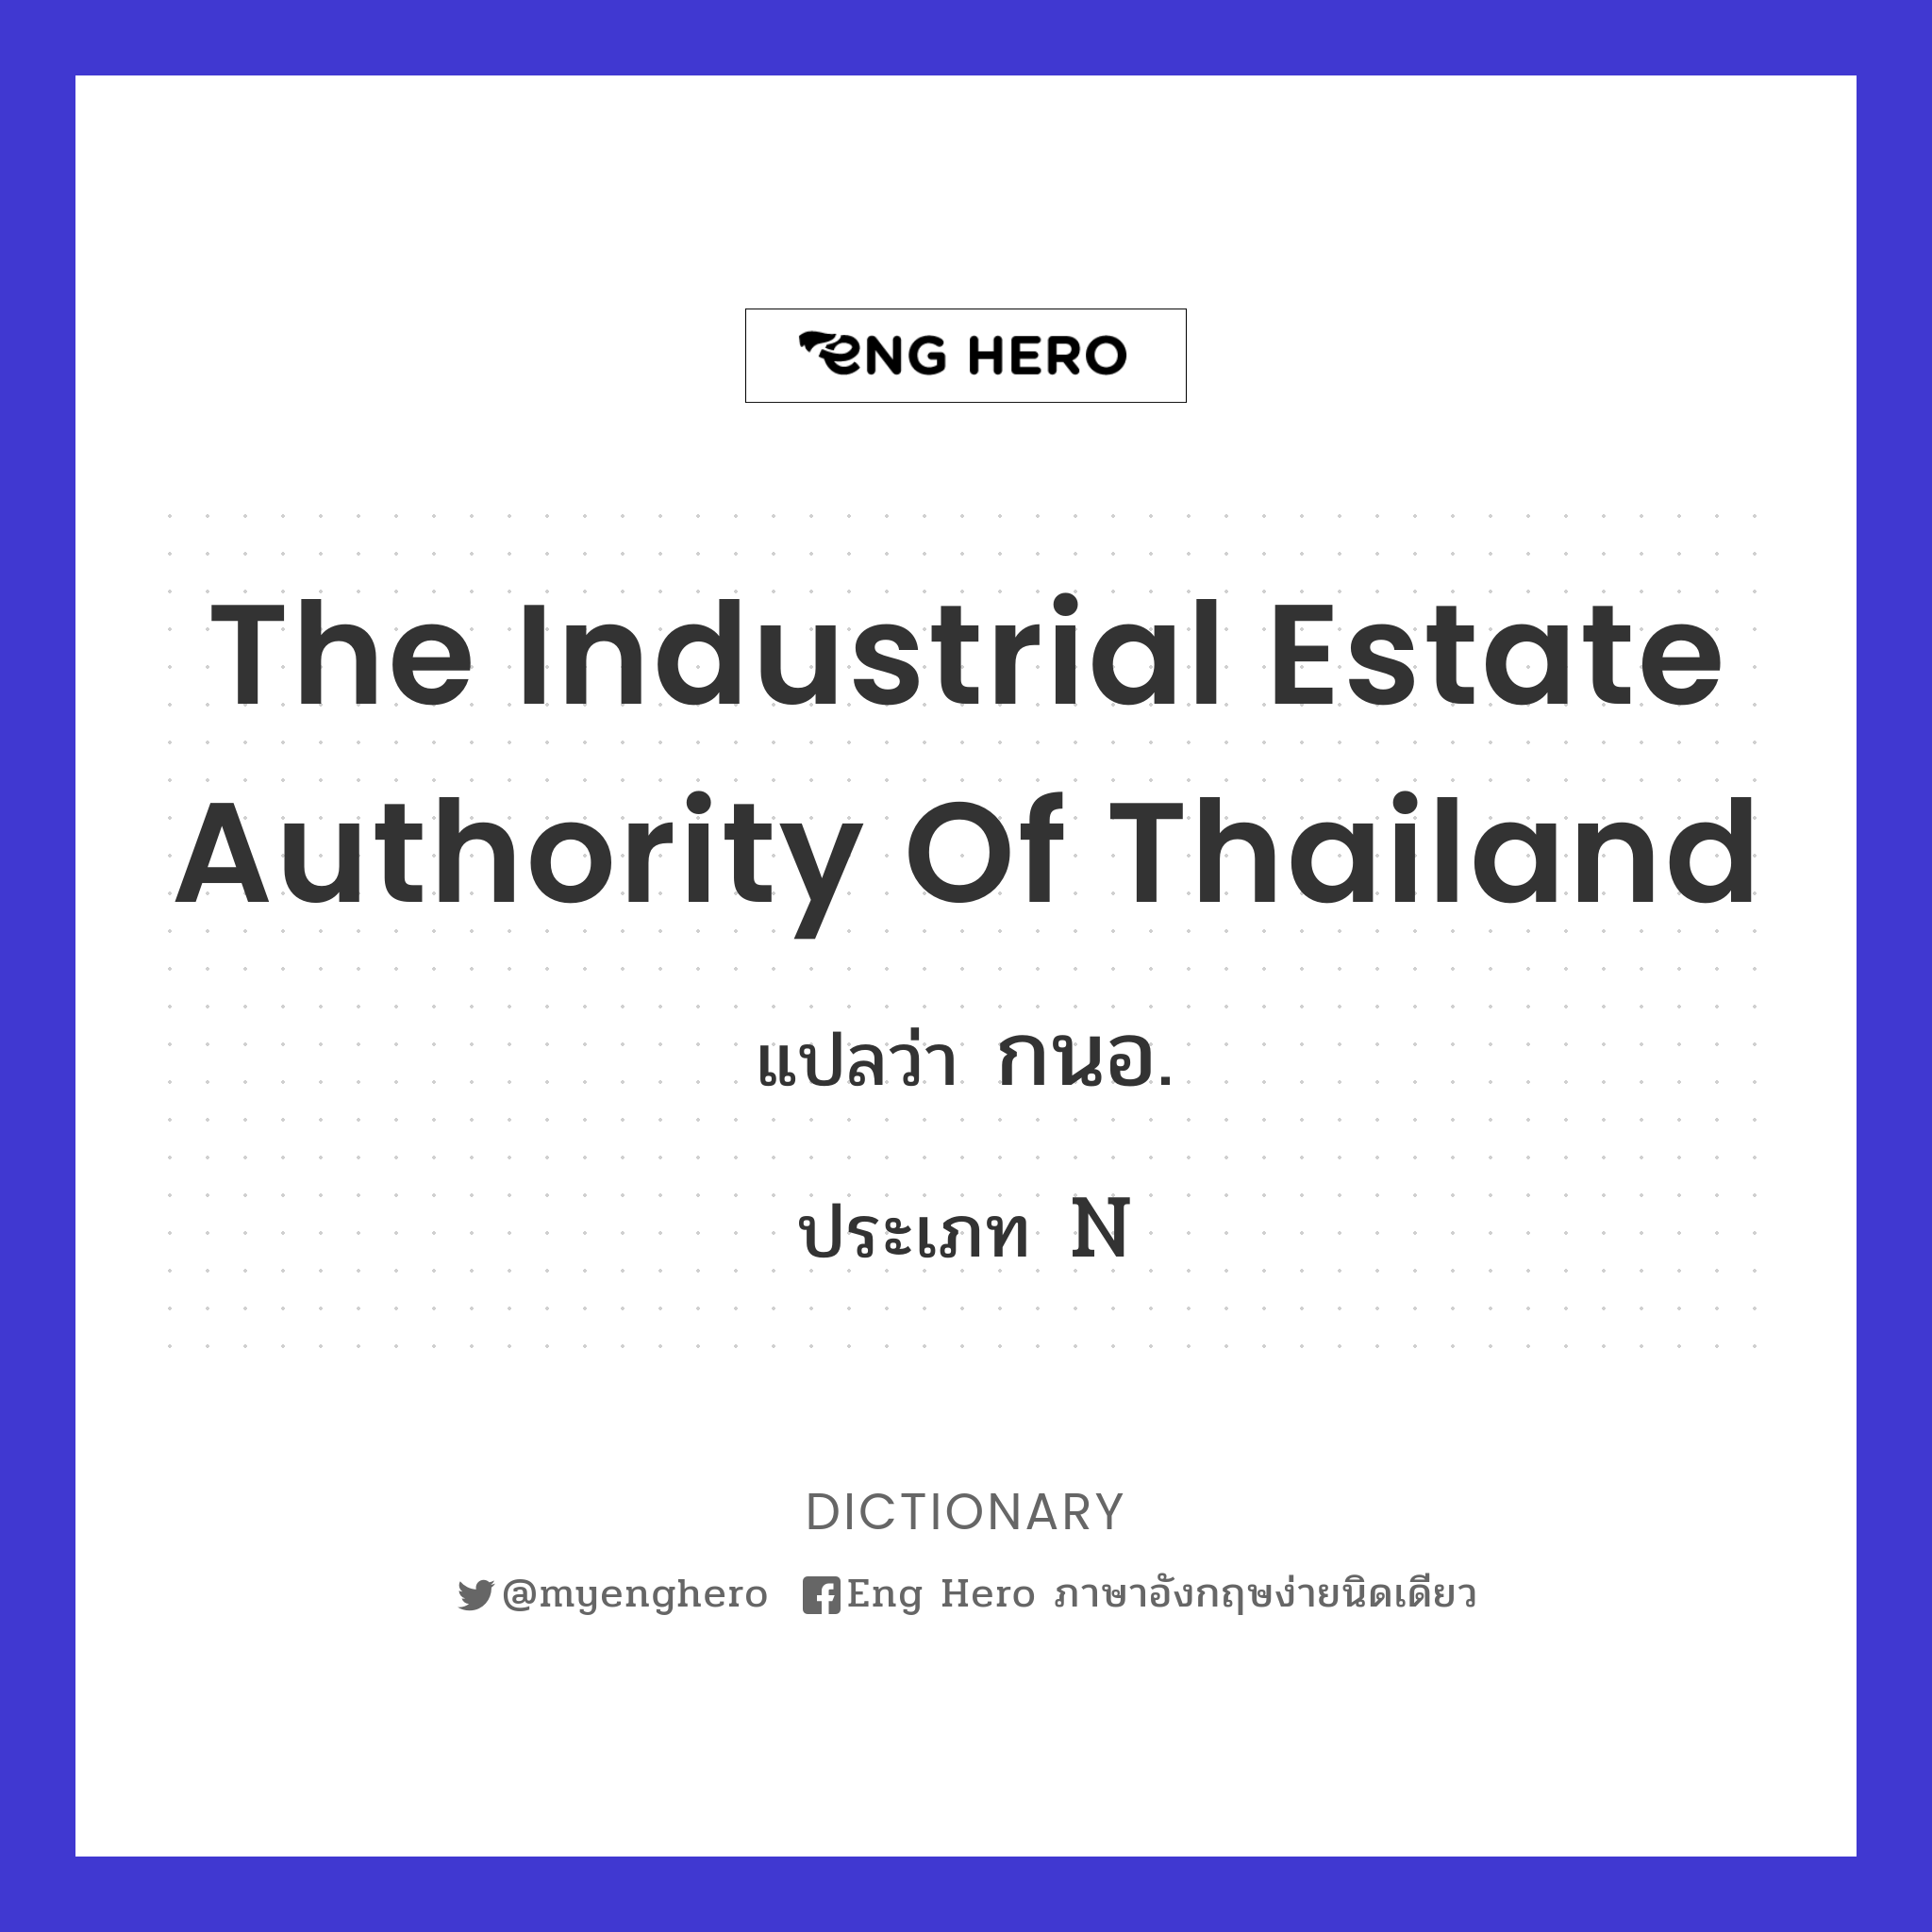 The Industrial Estate Authority of Thailand